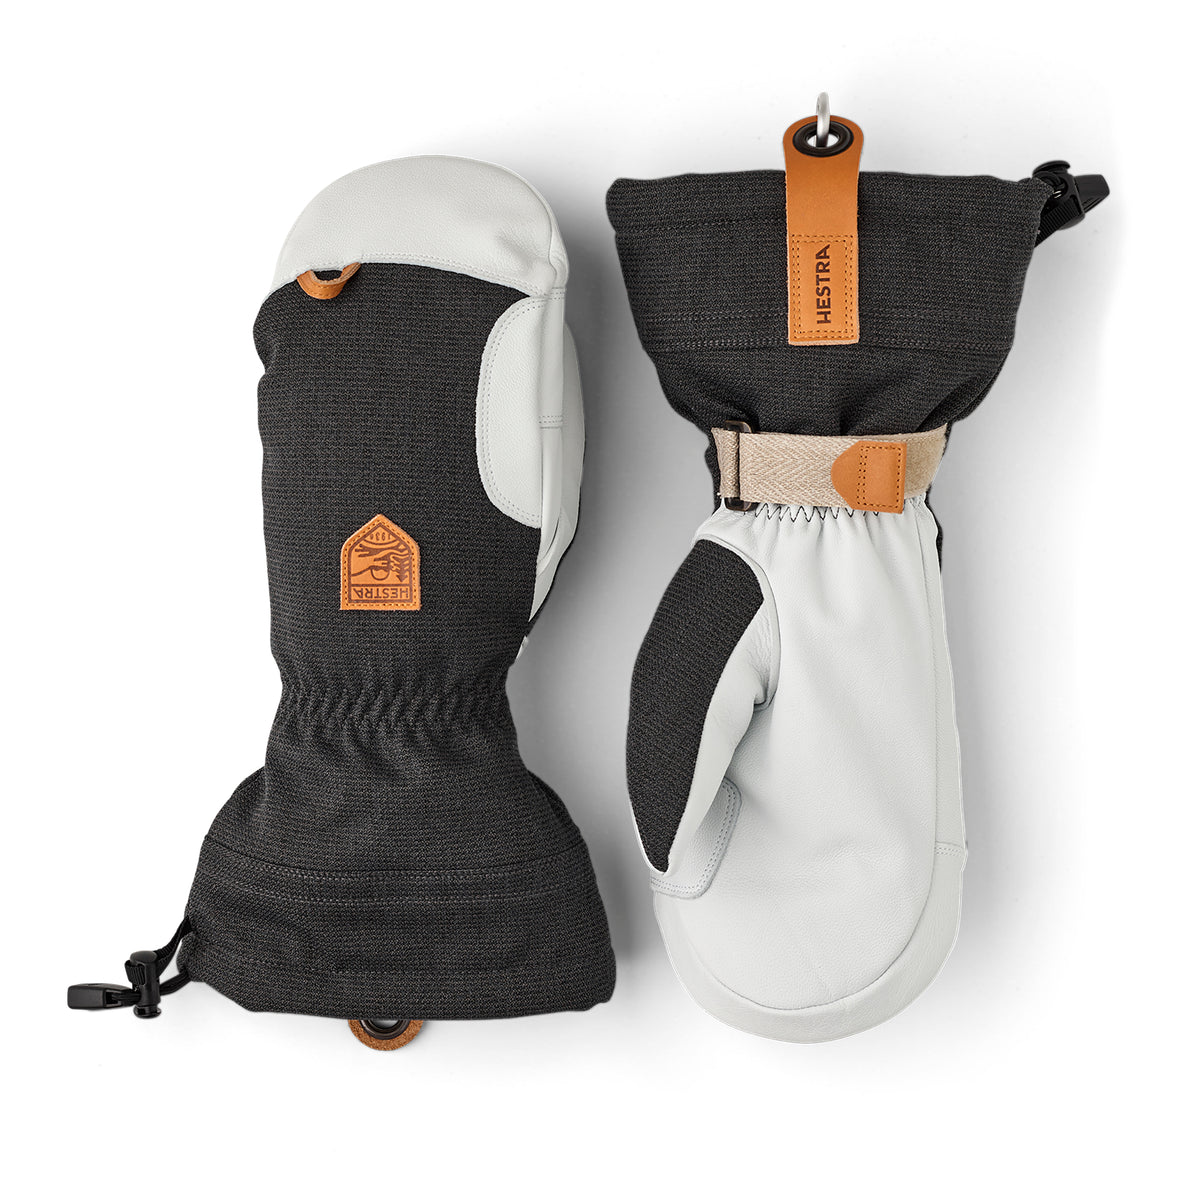 Hestra ARMY LEATHER PATROL GAUNTLET MITTS